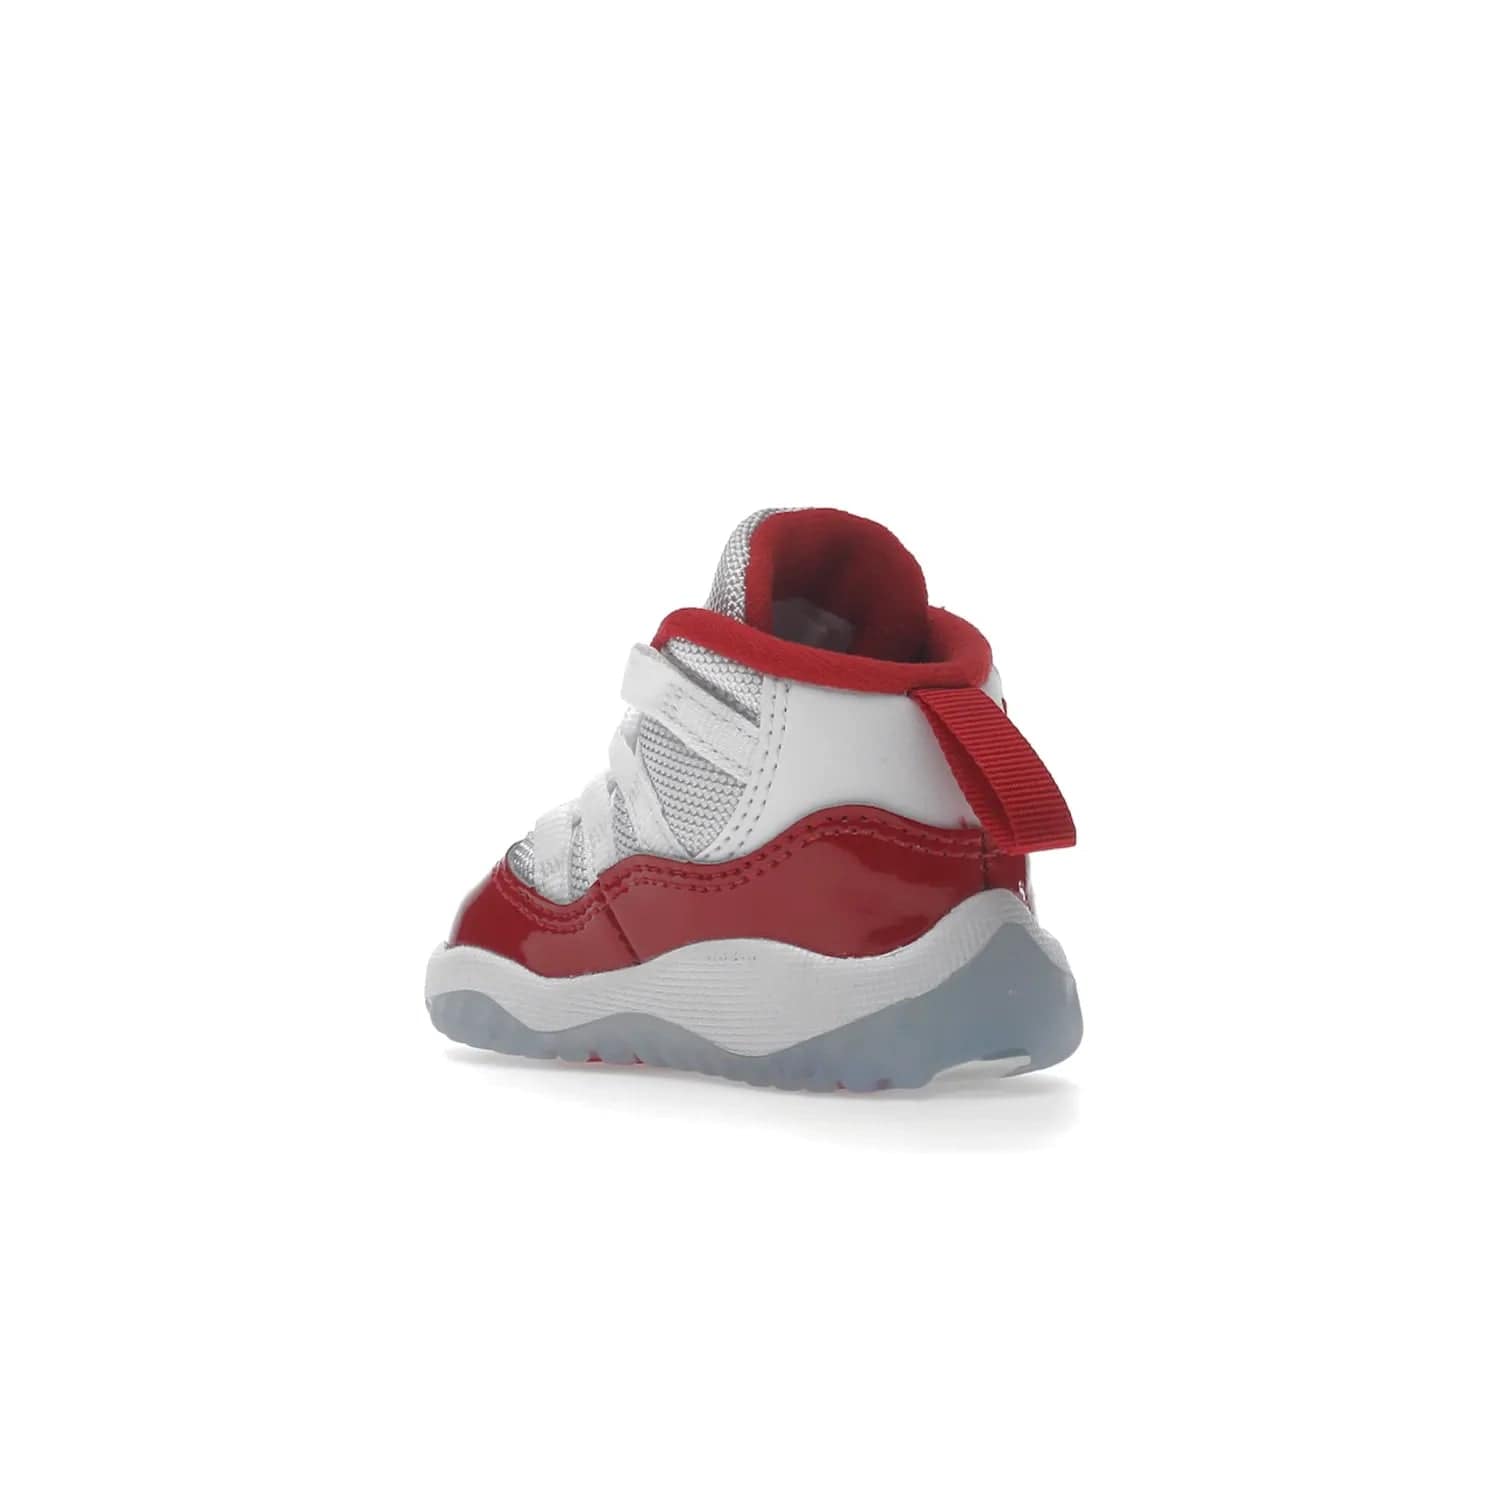 Jordan 11 Retro Cherry (2022) (TD) - Image 24 - Only at www.BallersClubKickz.com - Timeless classic. Air Jordan 11 Retro Cherry 2022 TD combines mesh, leather & suede for a unique look. White upper with varsity red suede. Jumpman logo on collar & tongue. Available Dec 10th, priced at $80.